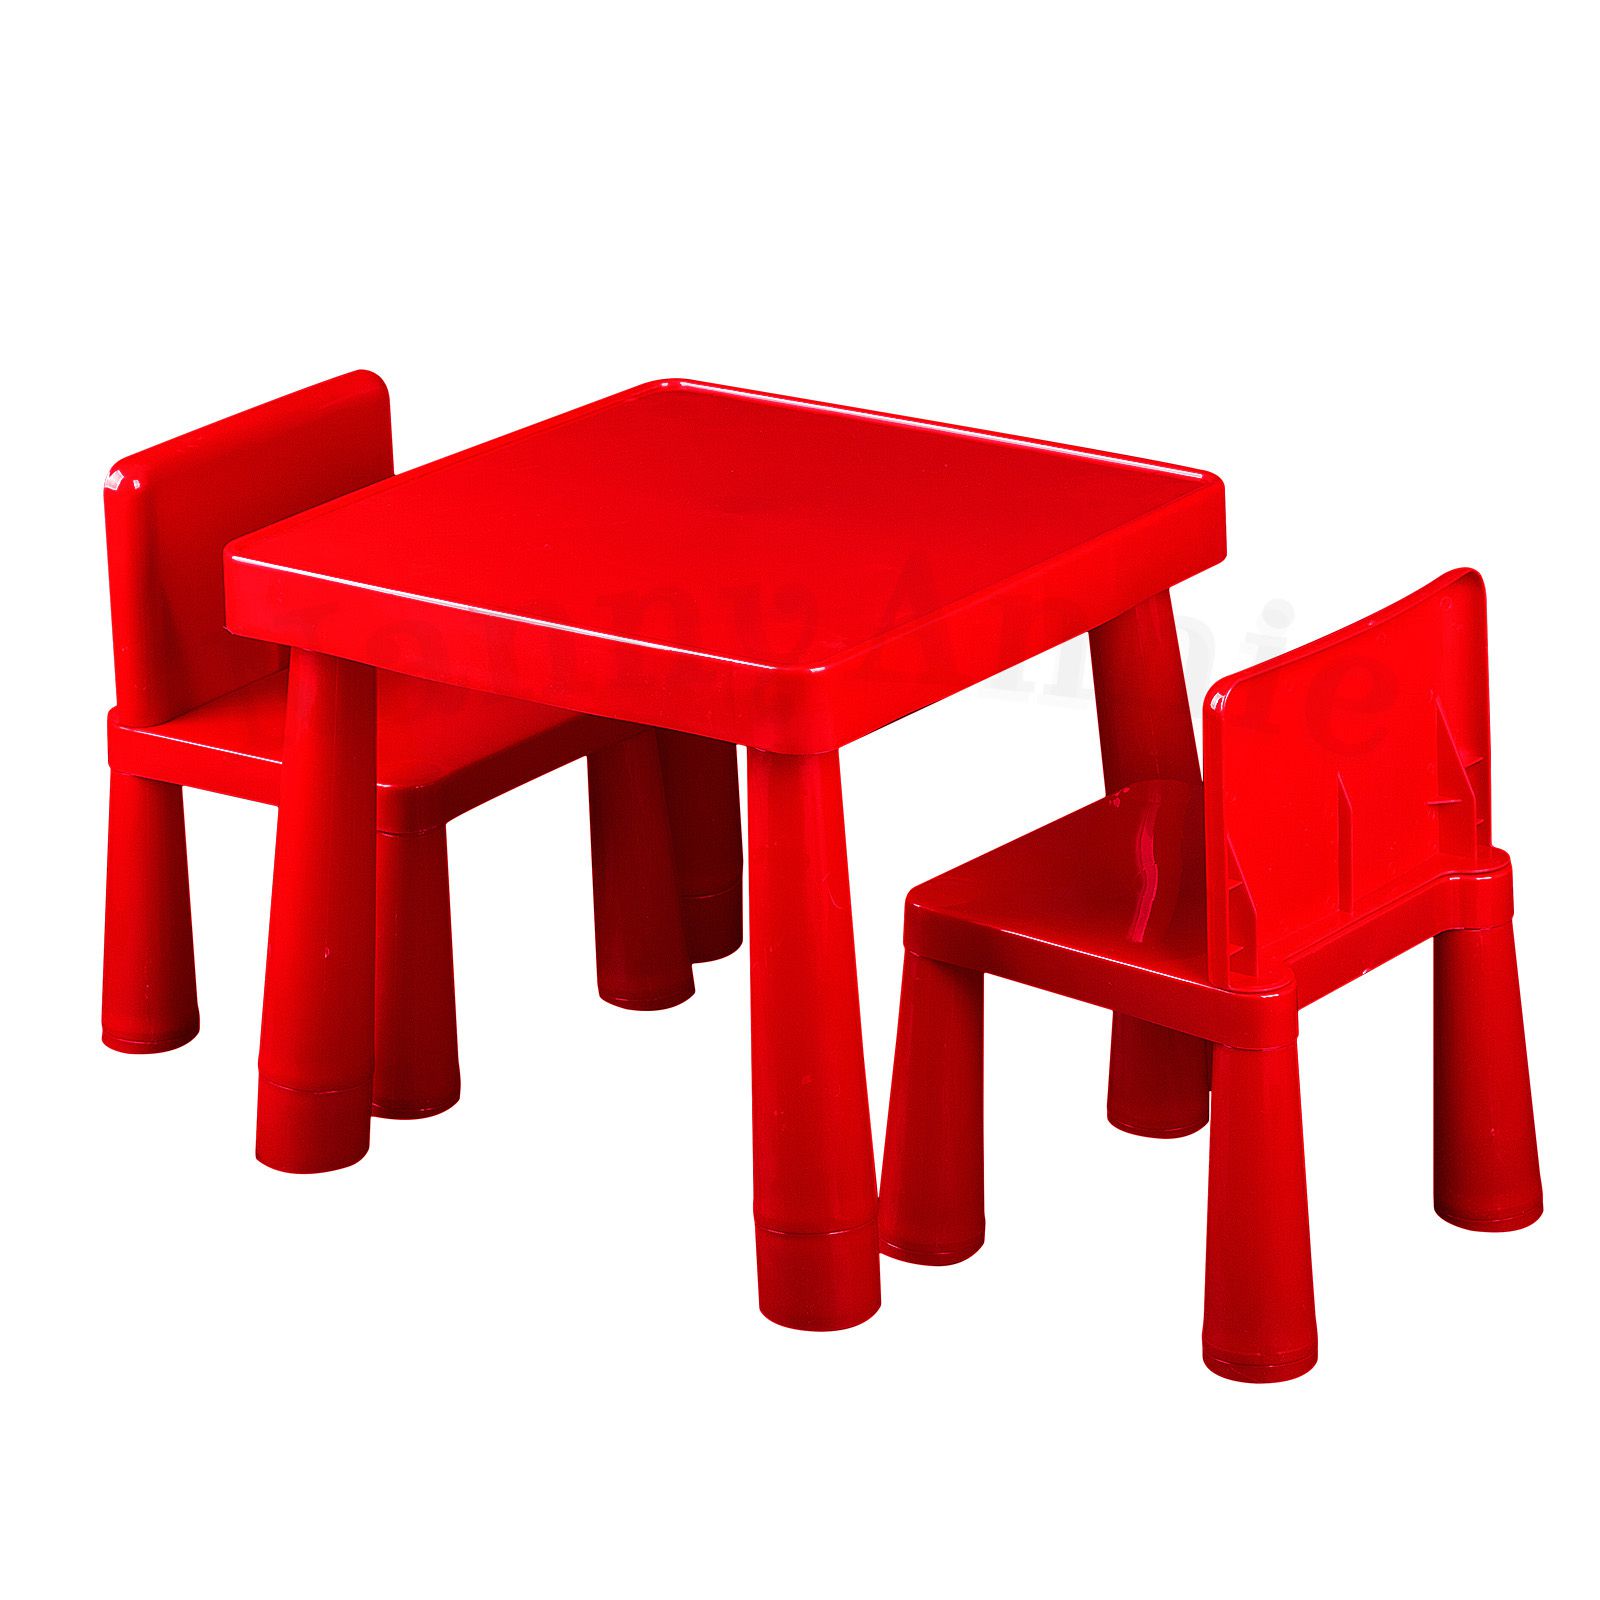 Kids Table & Chair Play Furniture Set Plastic Fountain Activity Dining Chairs RED